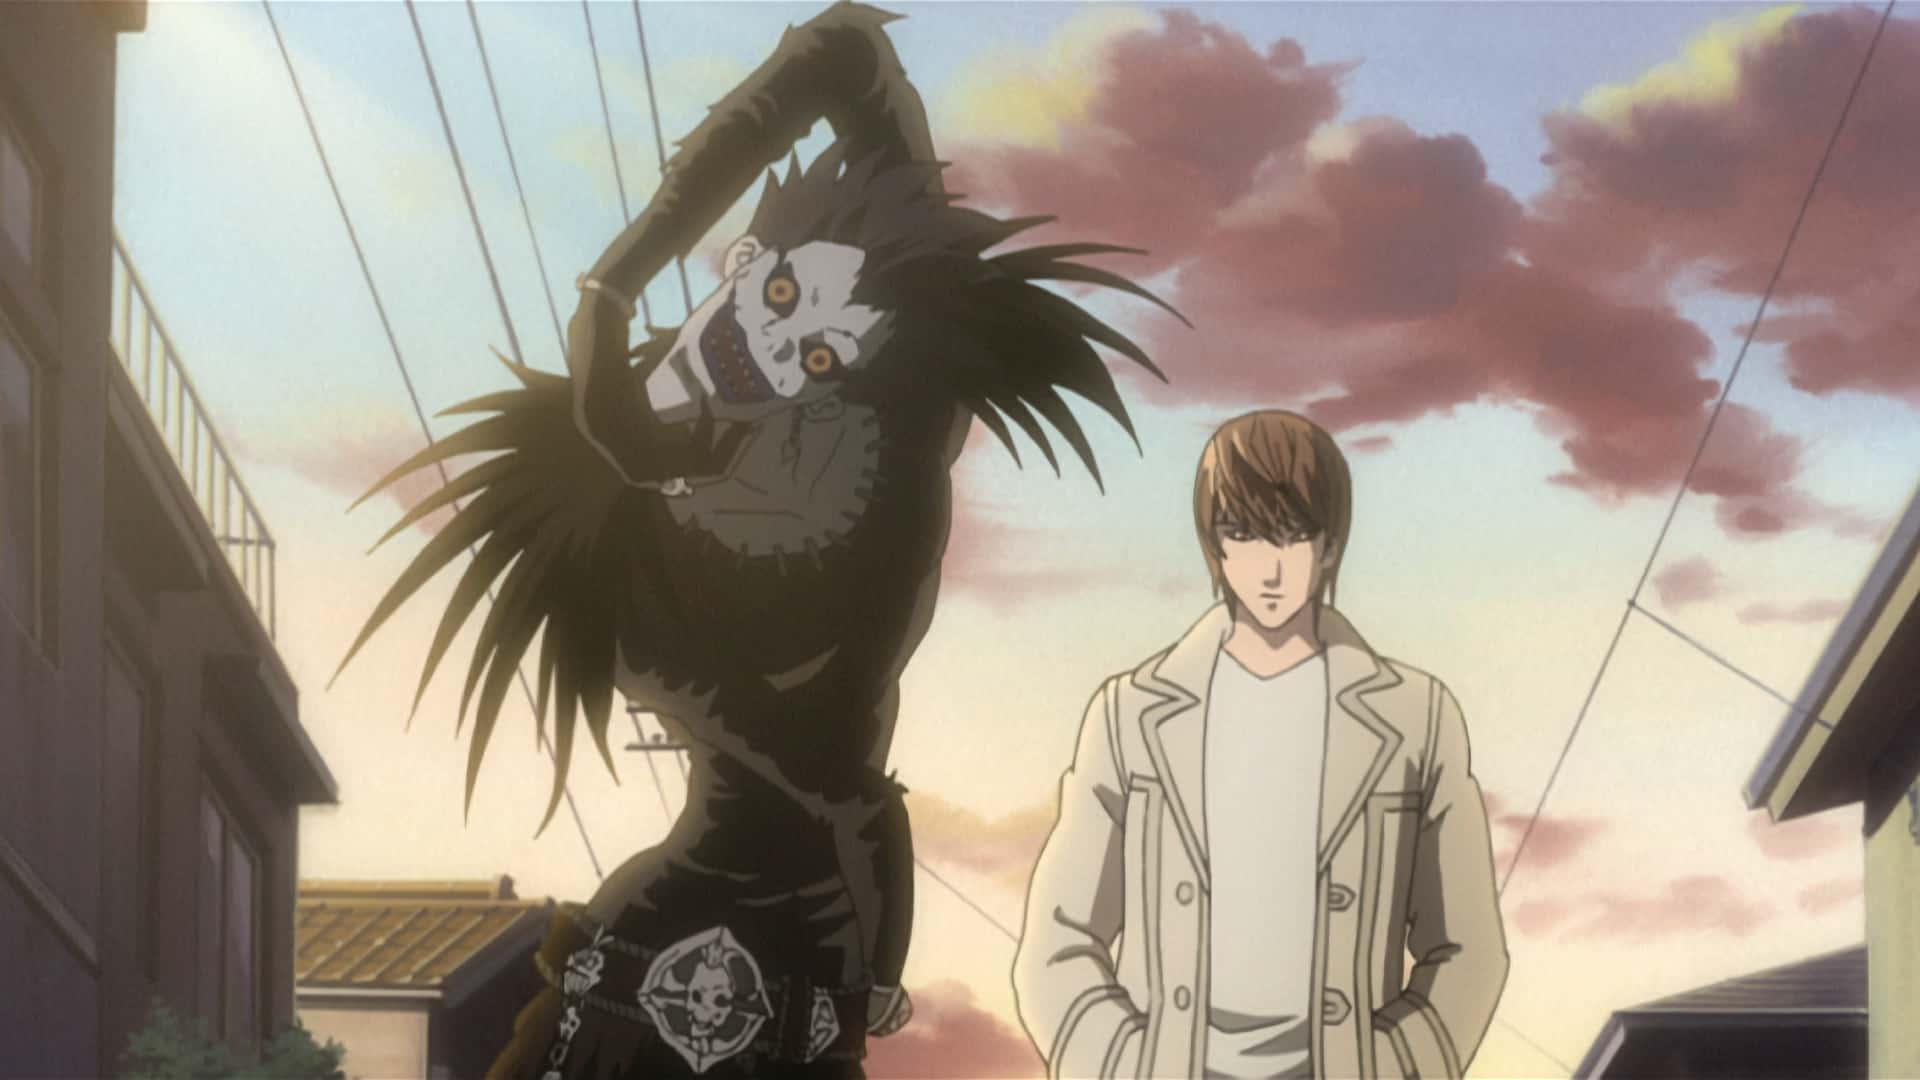 From left: Ryuk and Light from Death Note